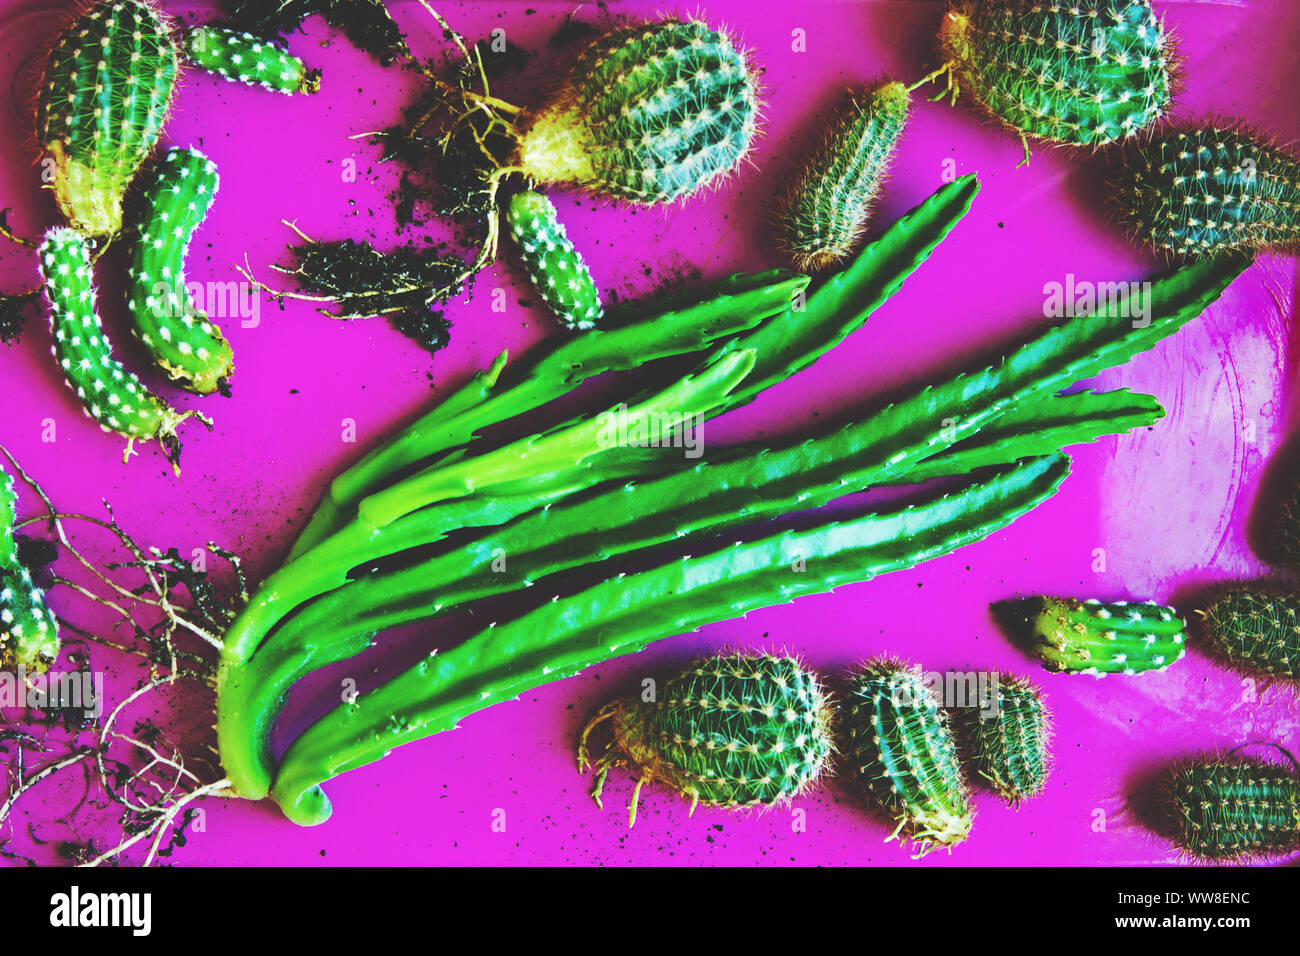 Kids of cactuses in a pink pallet. Many bright green small cactuses ready for planting. Stock Photo